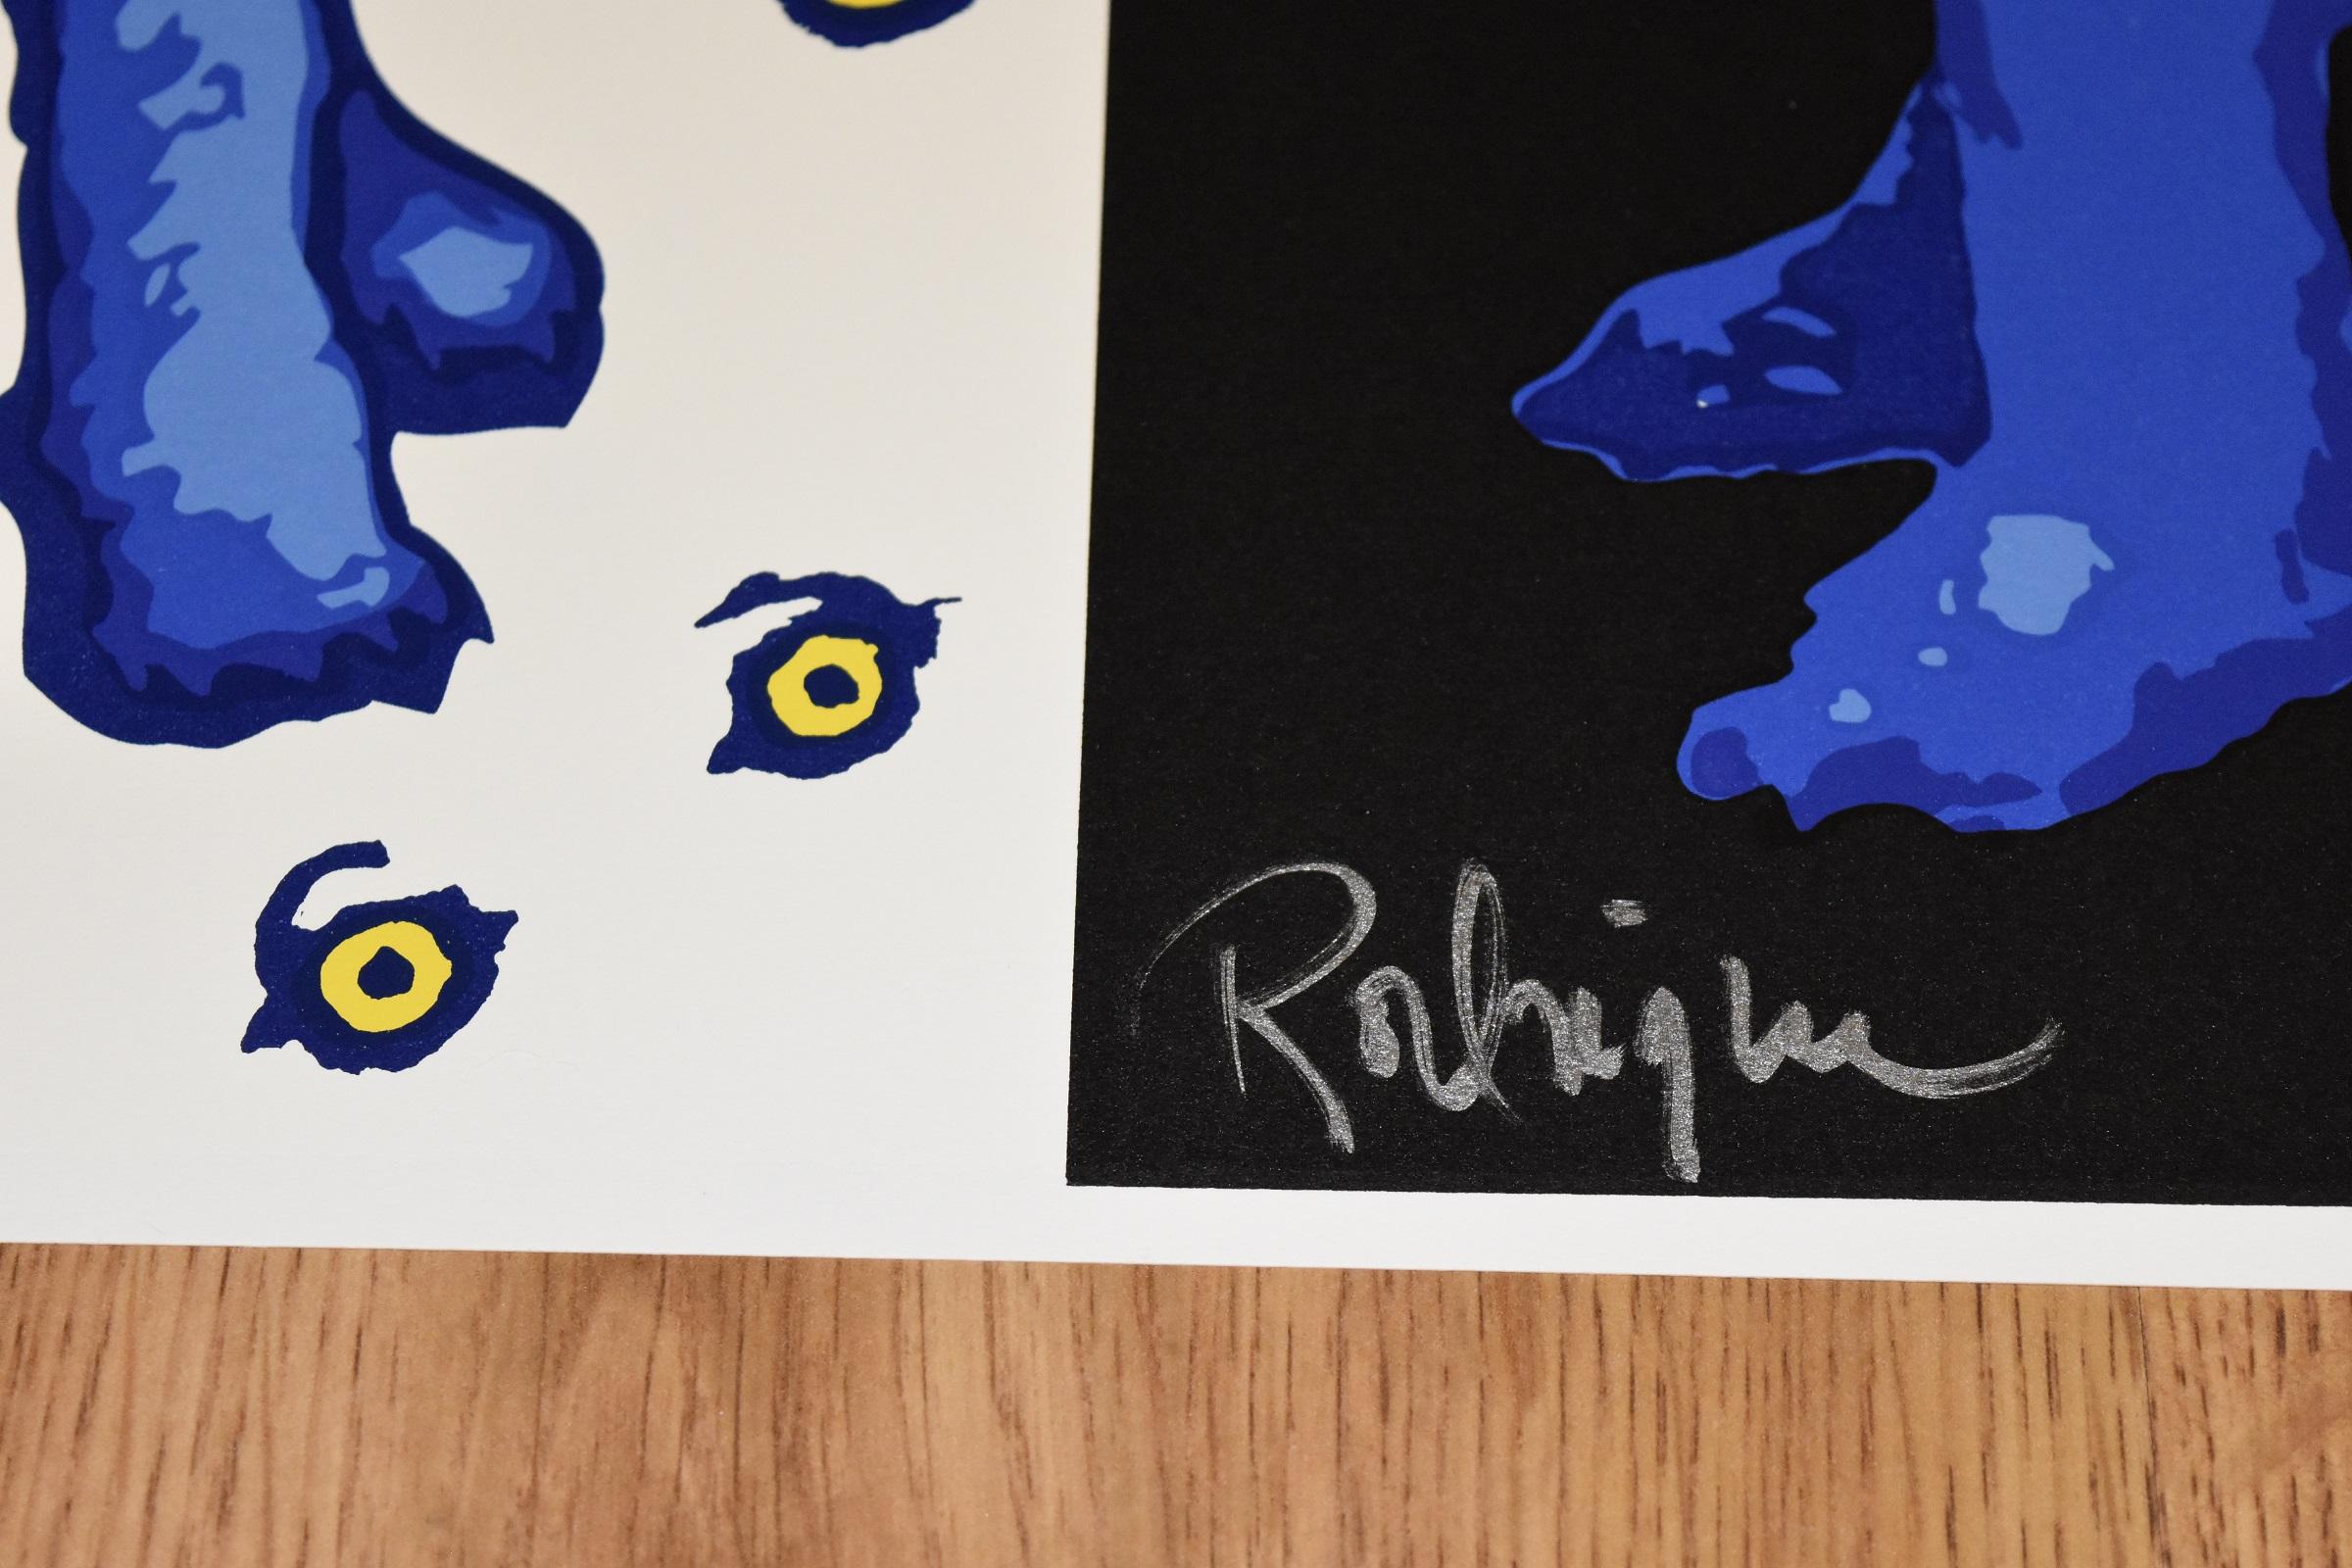 This Blue Dog work consists of 2 dogs with soulful yellow eyes.  One dog is on a black background and the other dog is on a white background covered in the dog's soulful yellow eyes scattered throughout.  This pop art animal original silkscreen